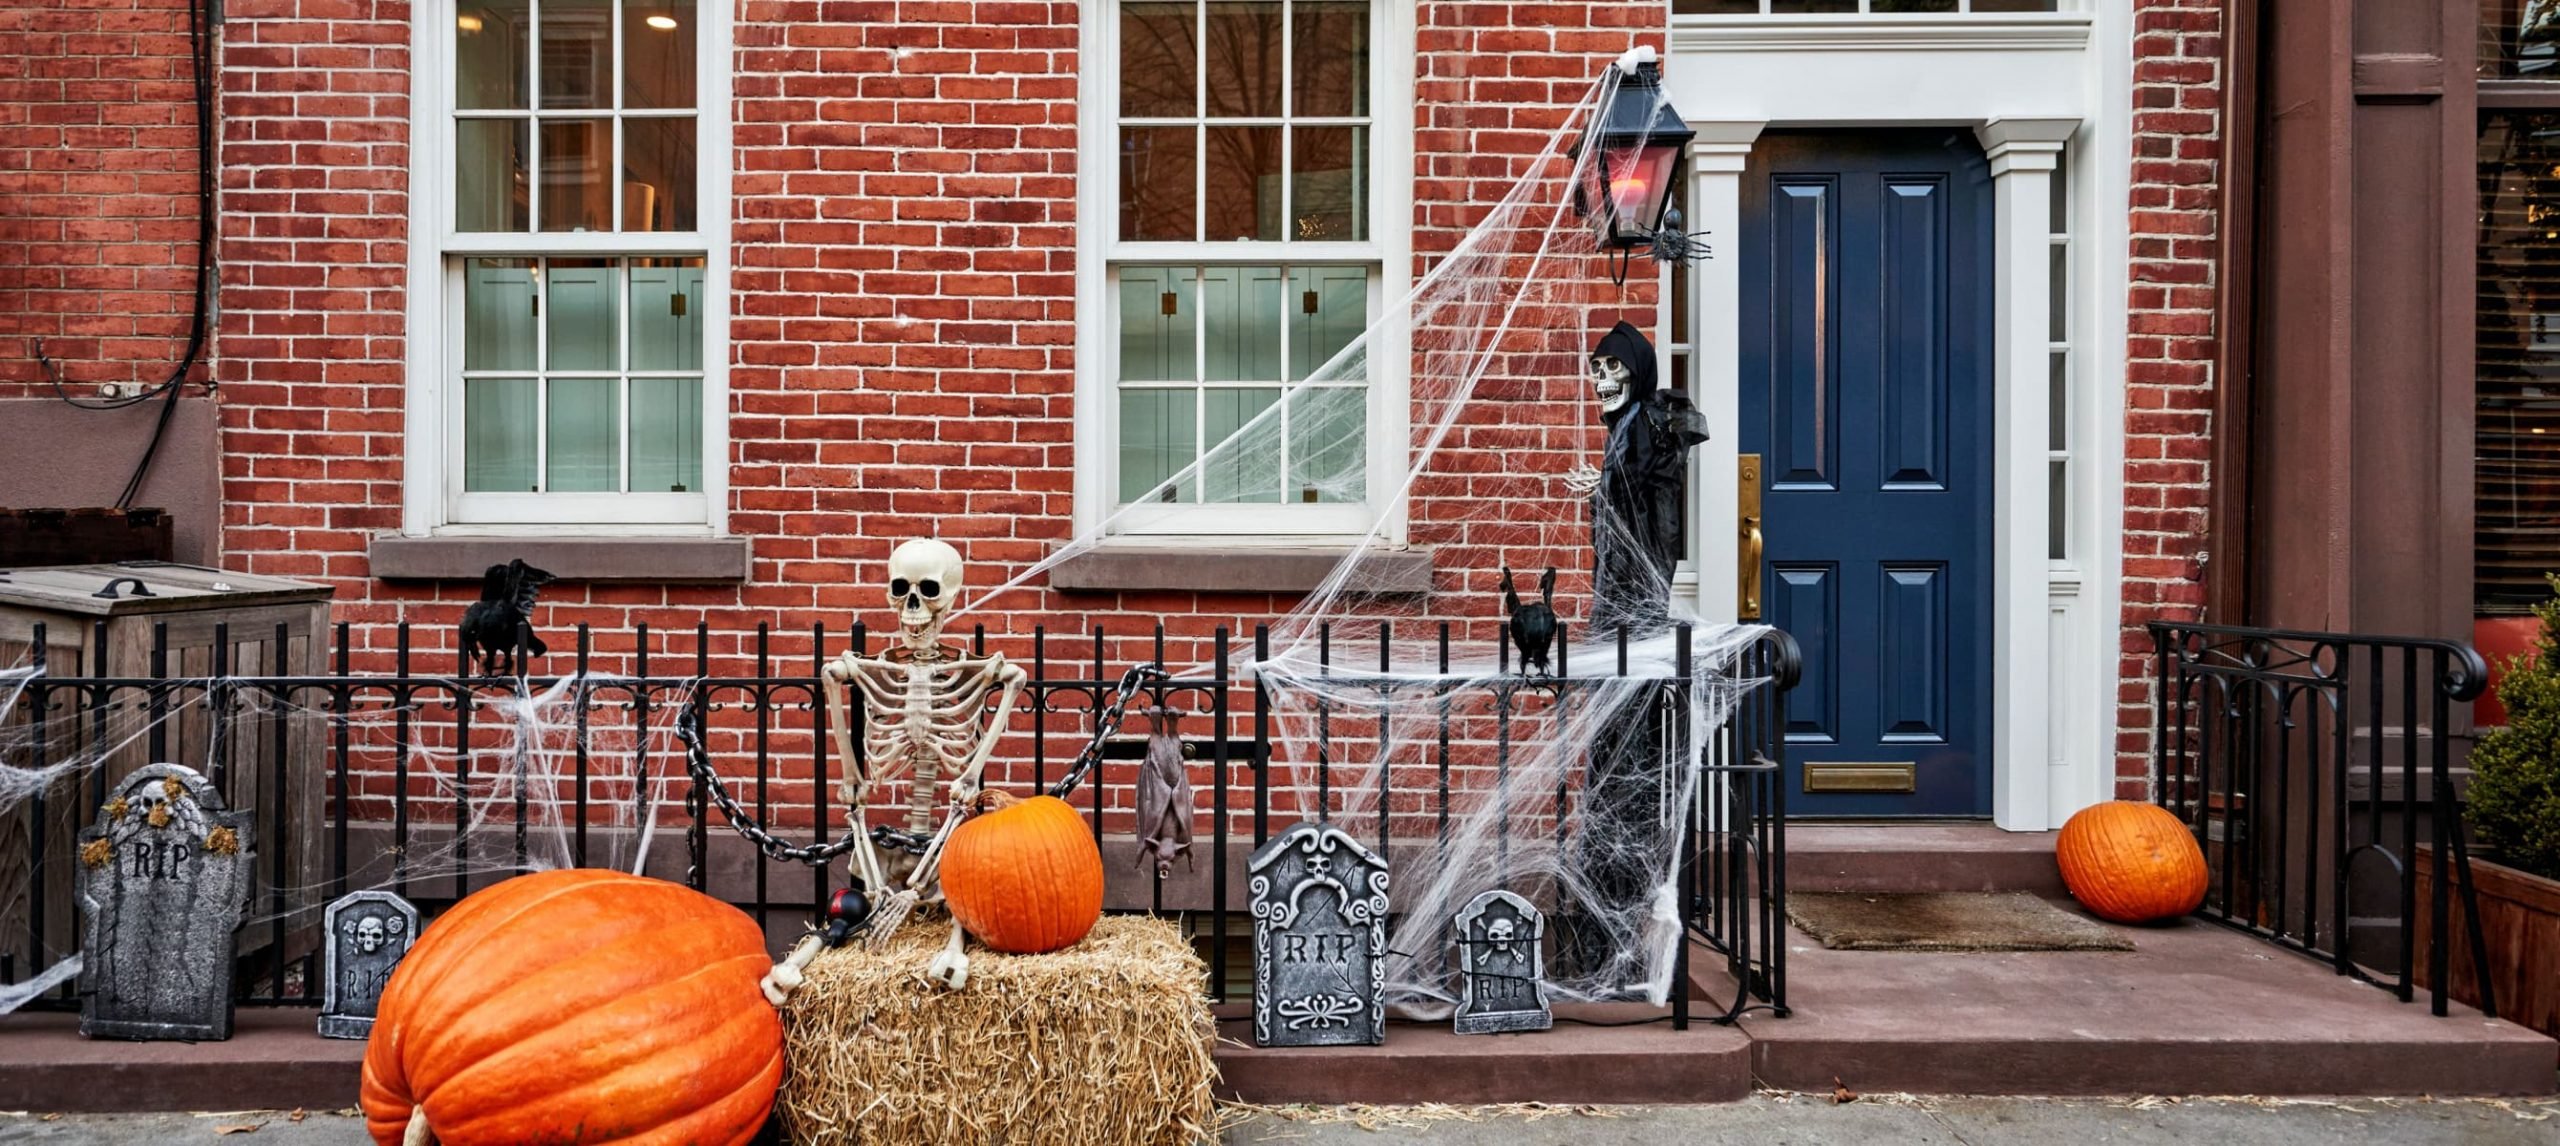 a door entrance covered in Halloween decorations